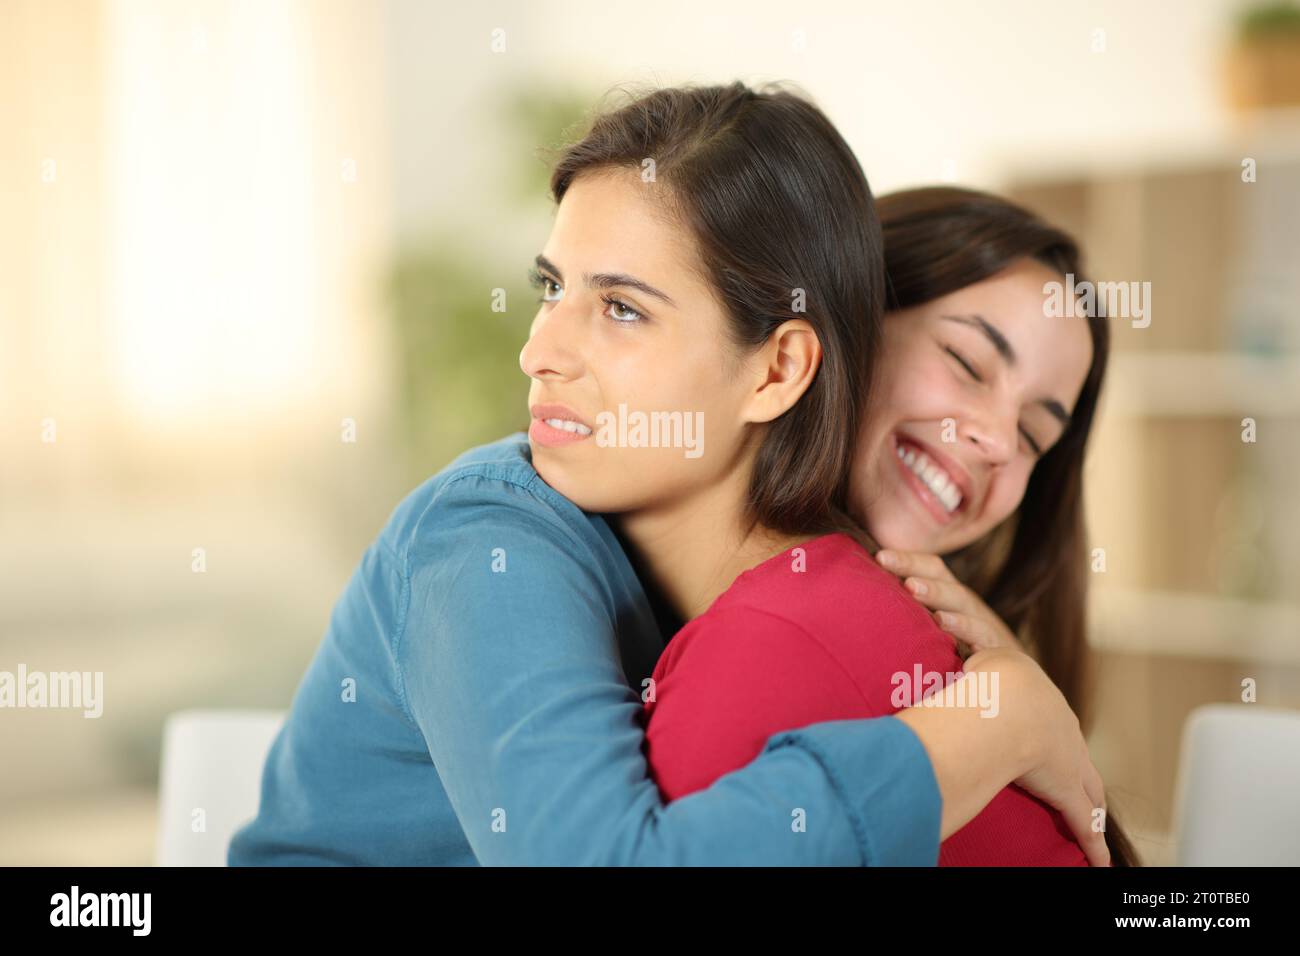 Happy woman hugging a false friend in the living room at home Stock Photo